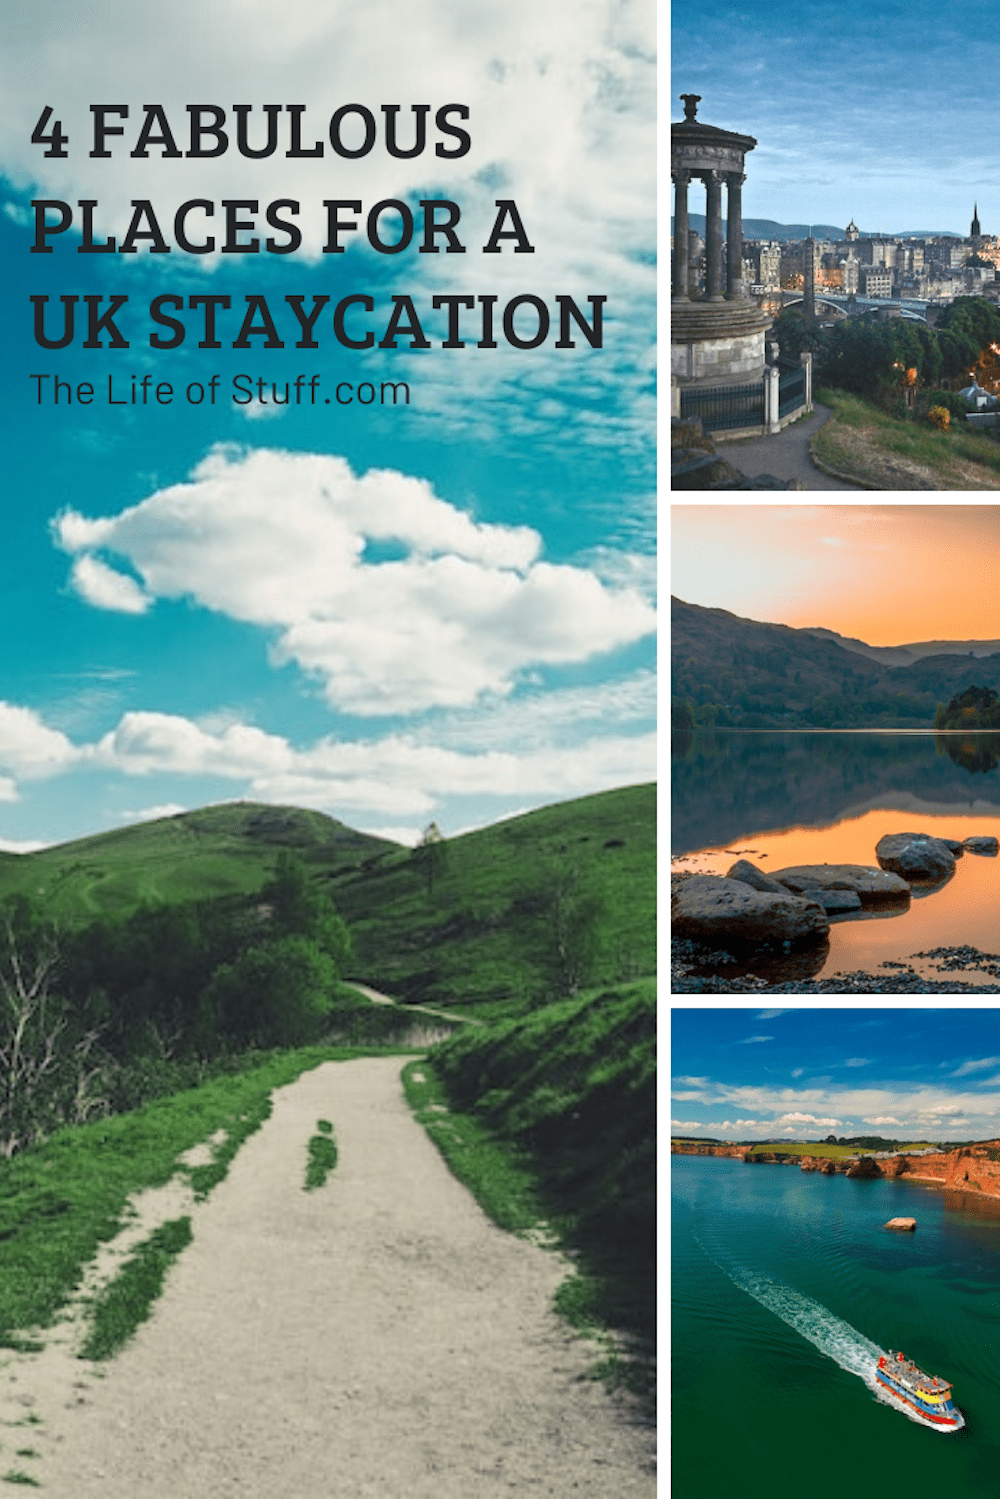 Living in the UK? 4 Fabulous Places for a UK Staycation - The Life of Stuff